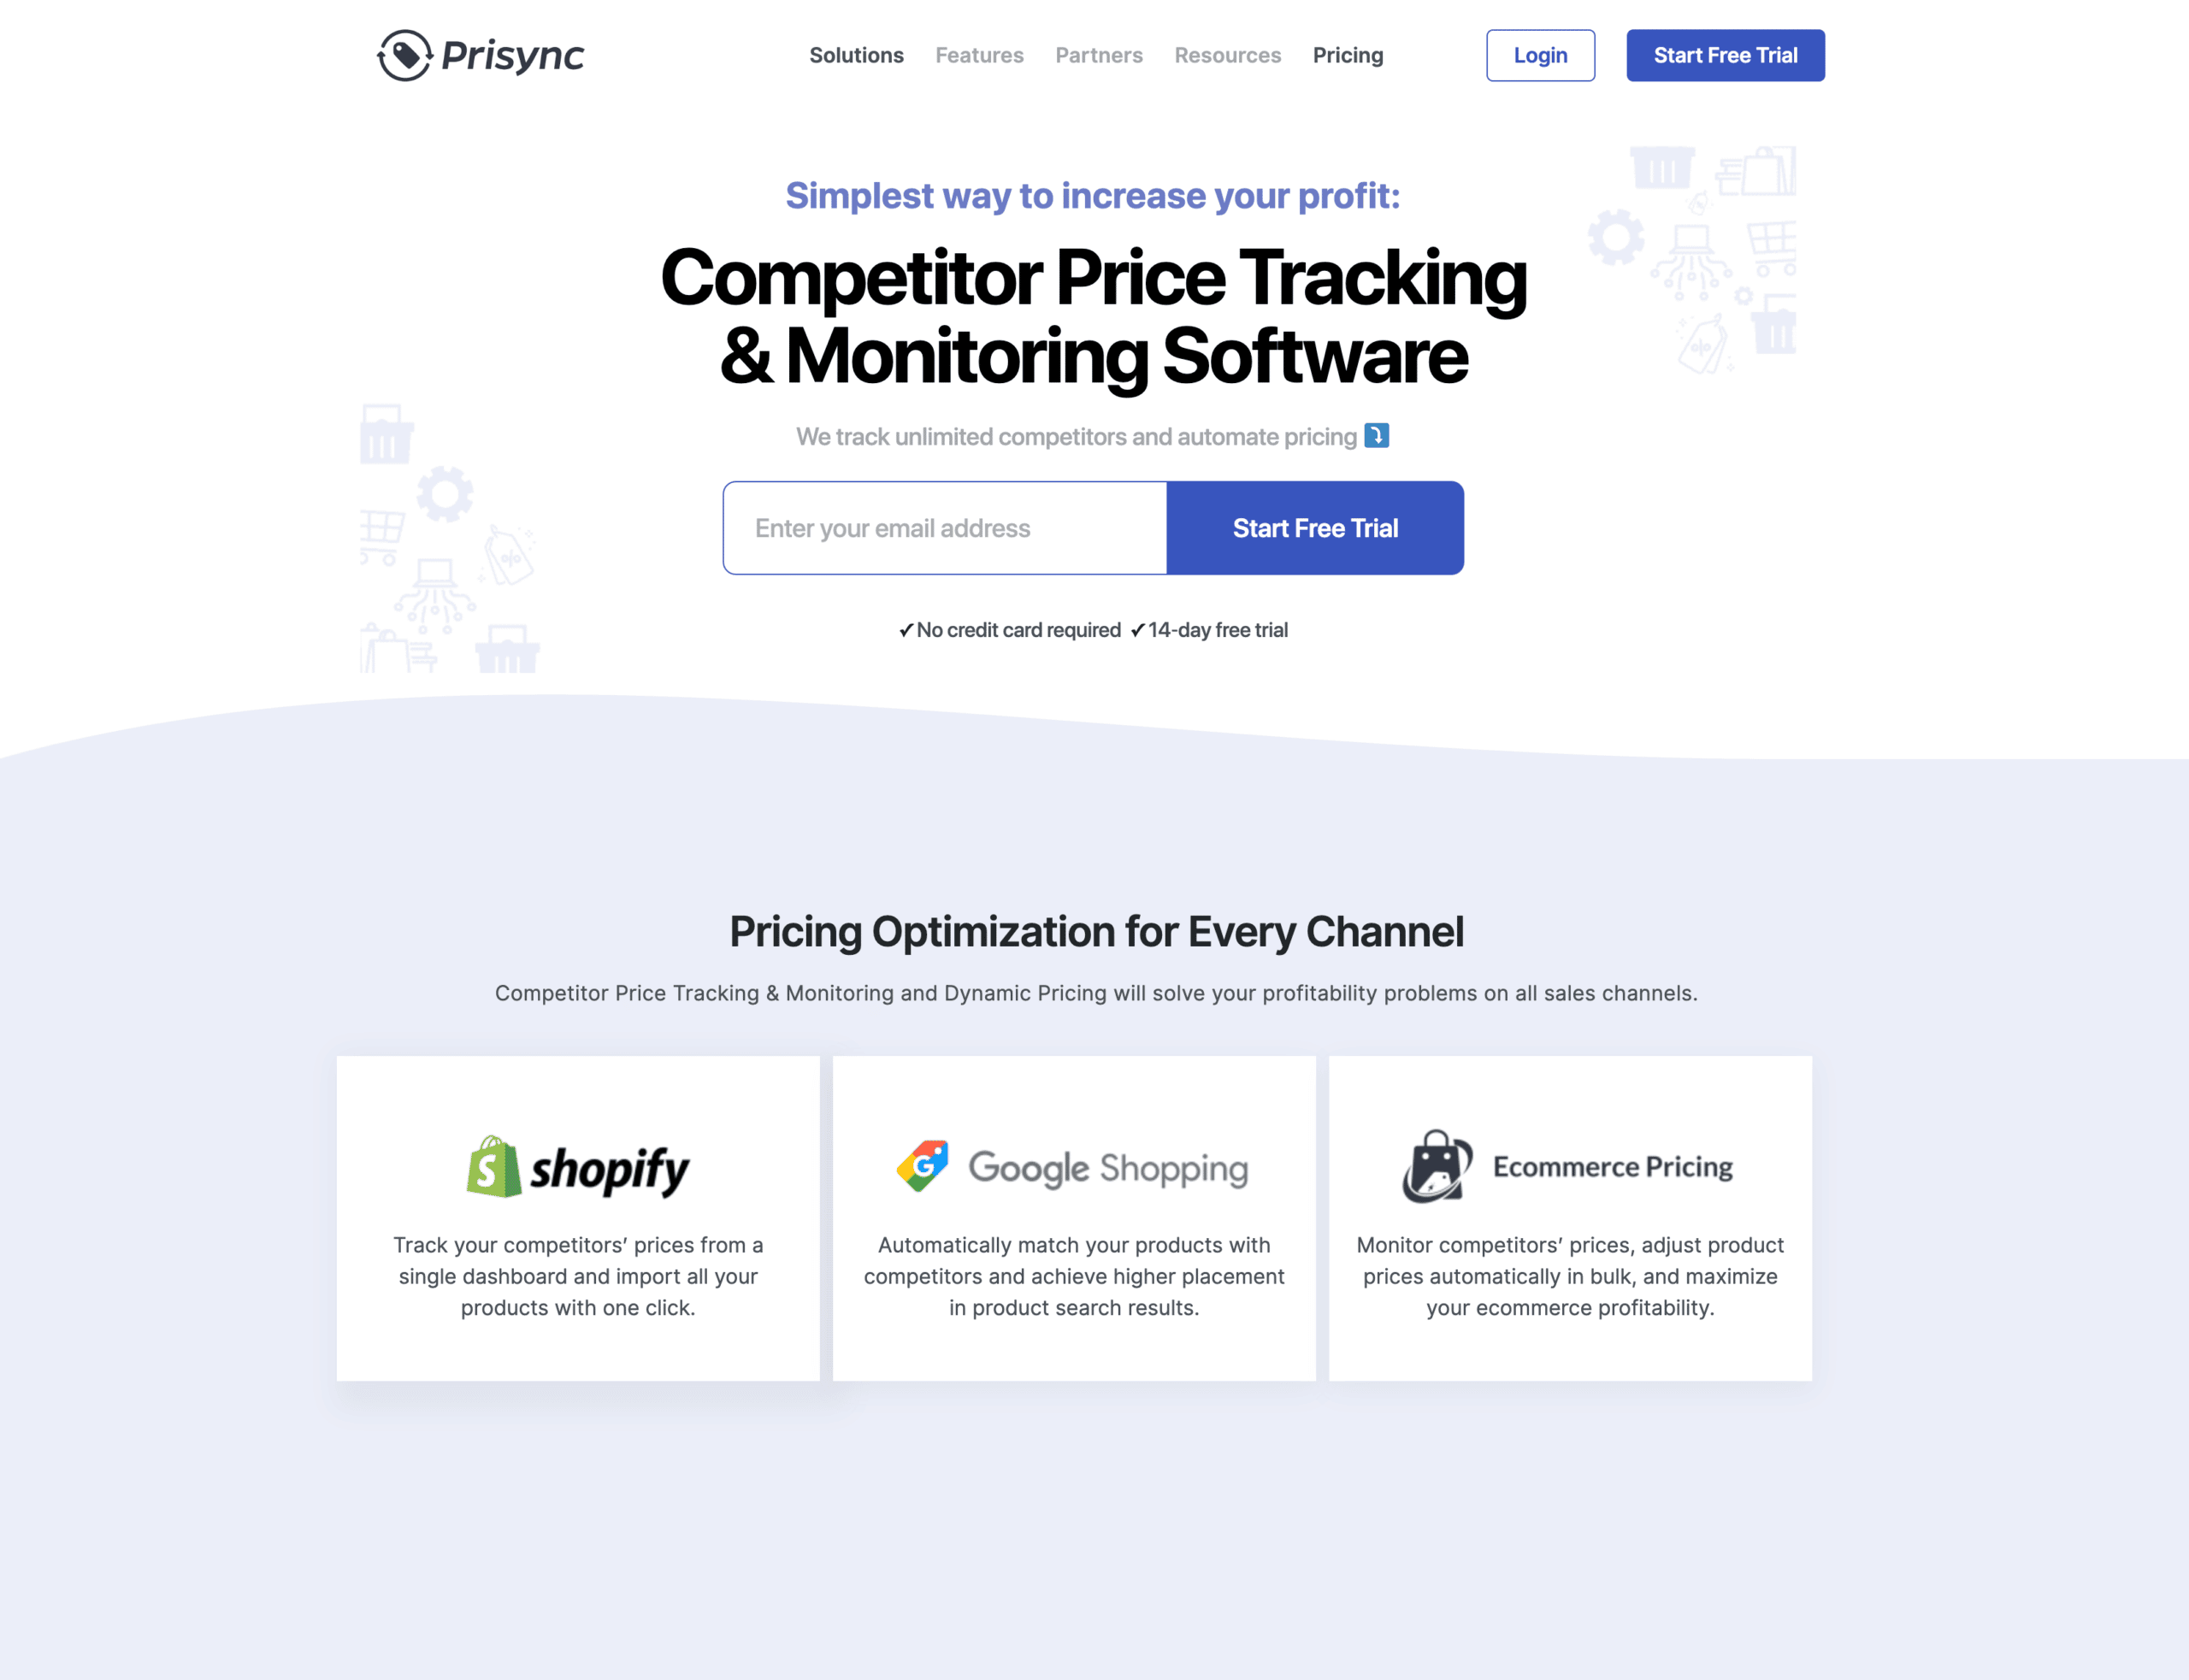 Prisync; a SaaS tool to keep track of competitors